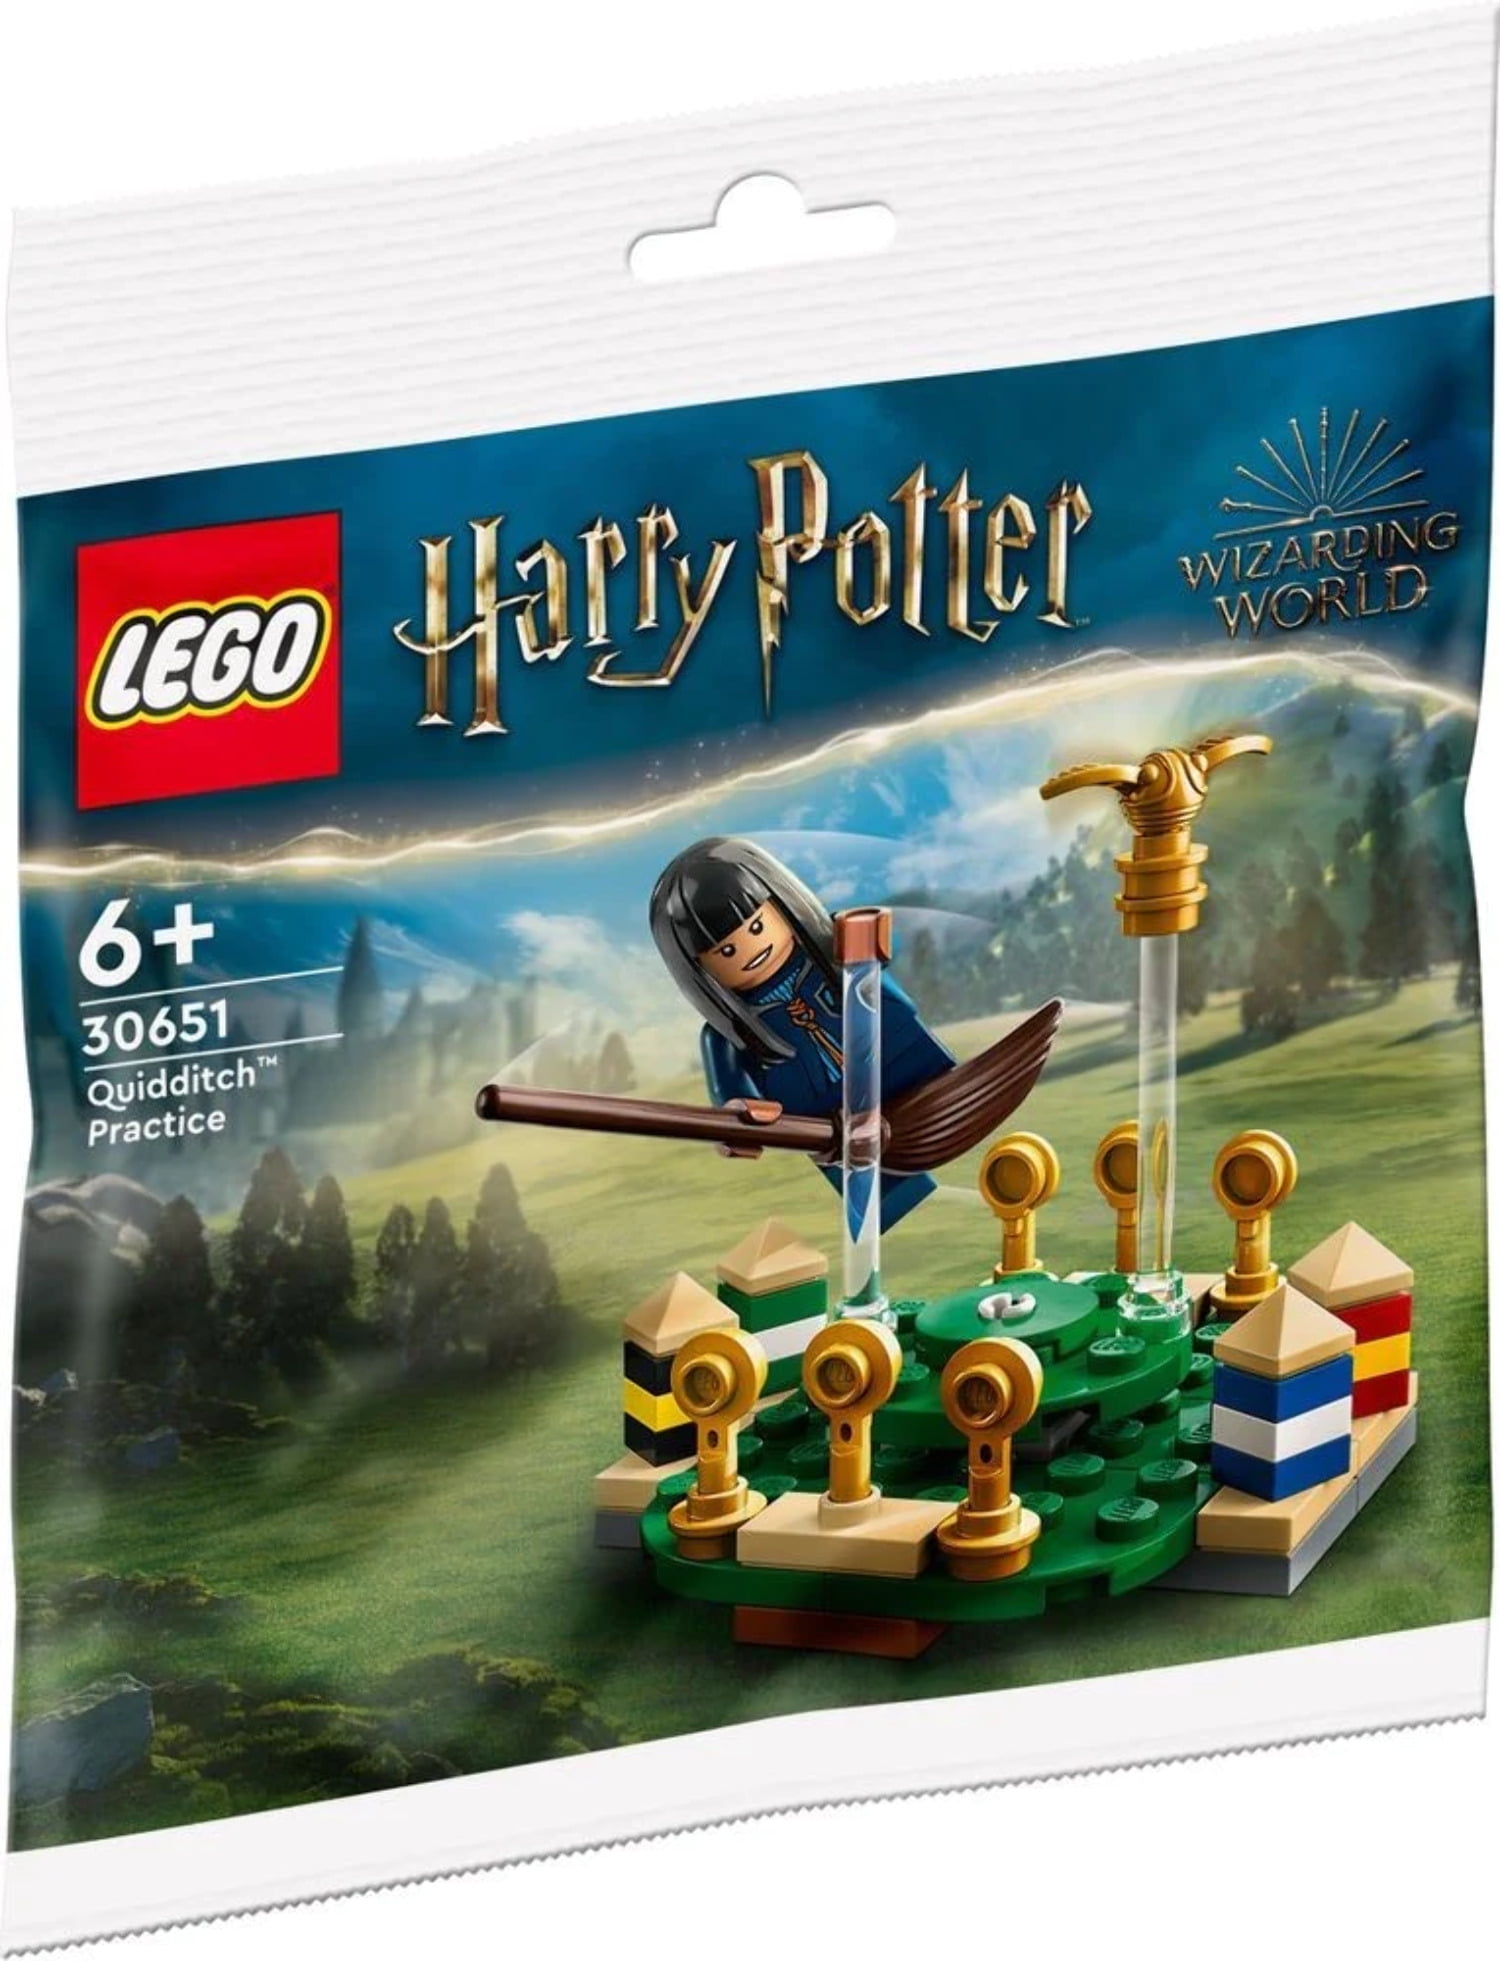 LEGO Harry Potter Hogwarts: Dumbledore's Office 76402 Castle Toy, Set with  Sorting Hat, Sword of Gryffindor and 6 Minifigures, for Kids Aged 8 Plus